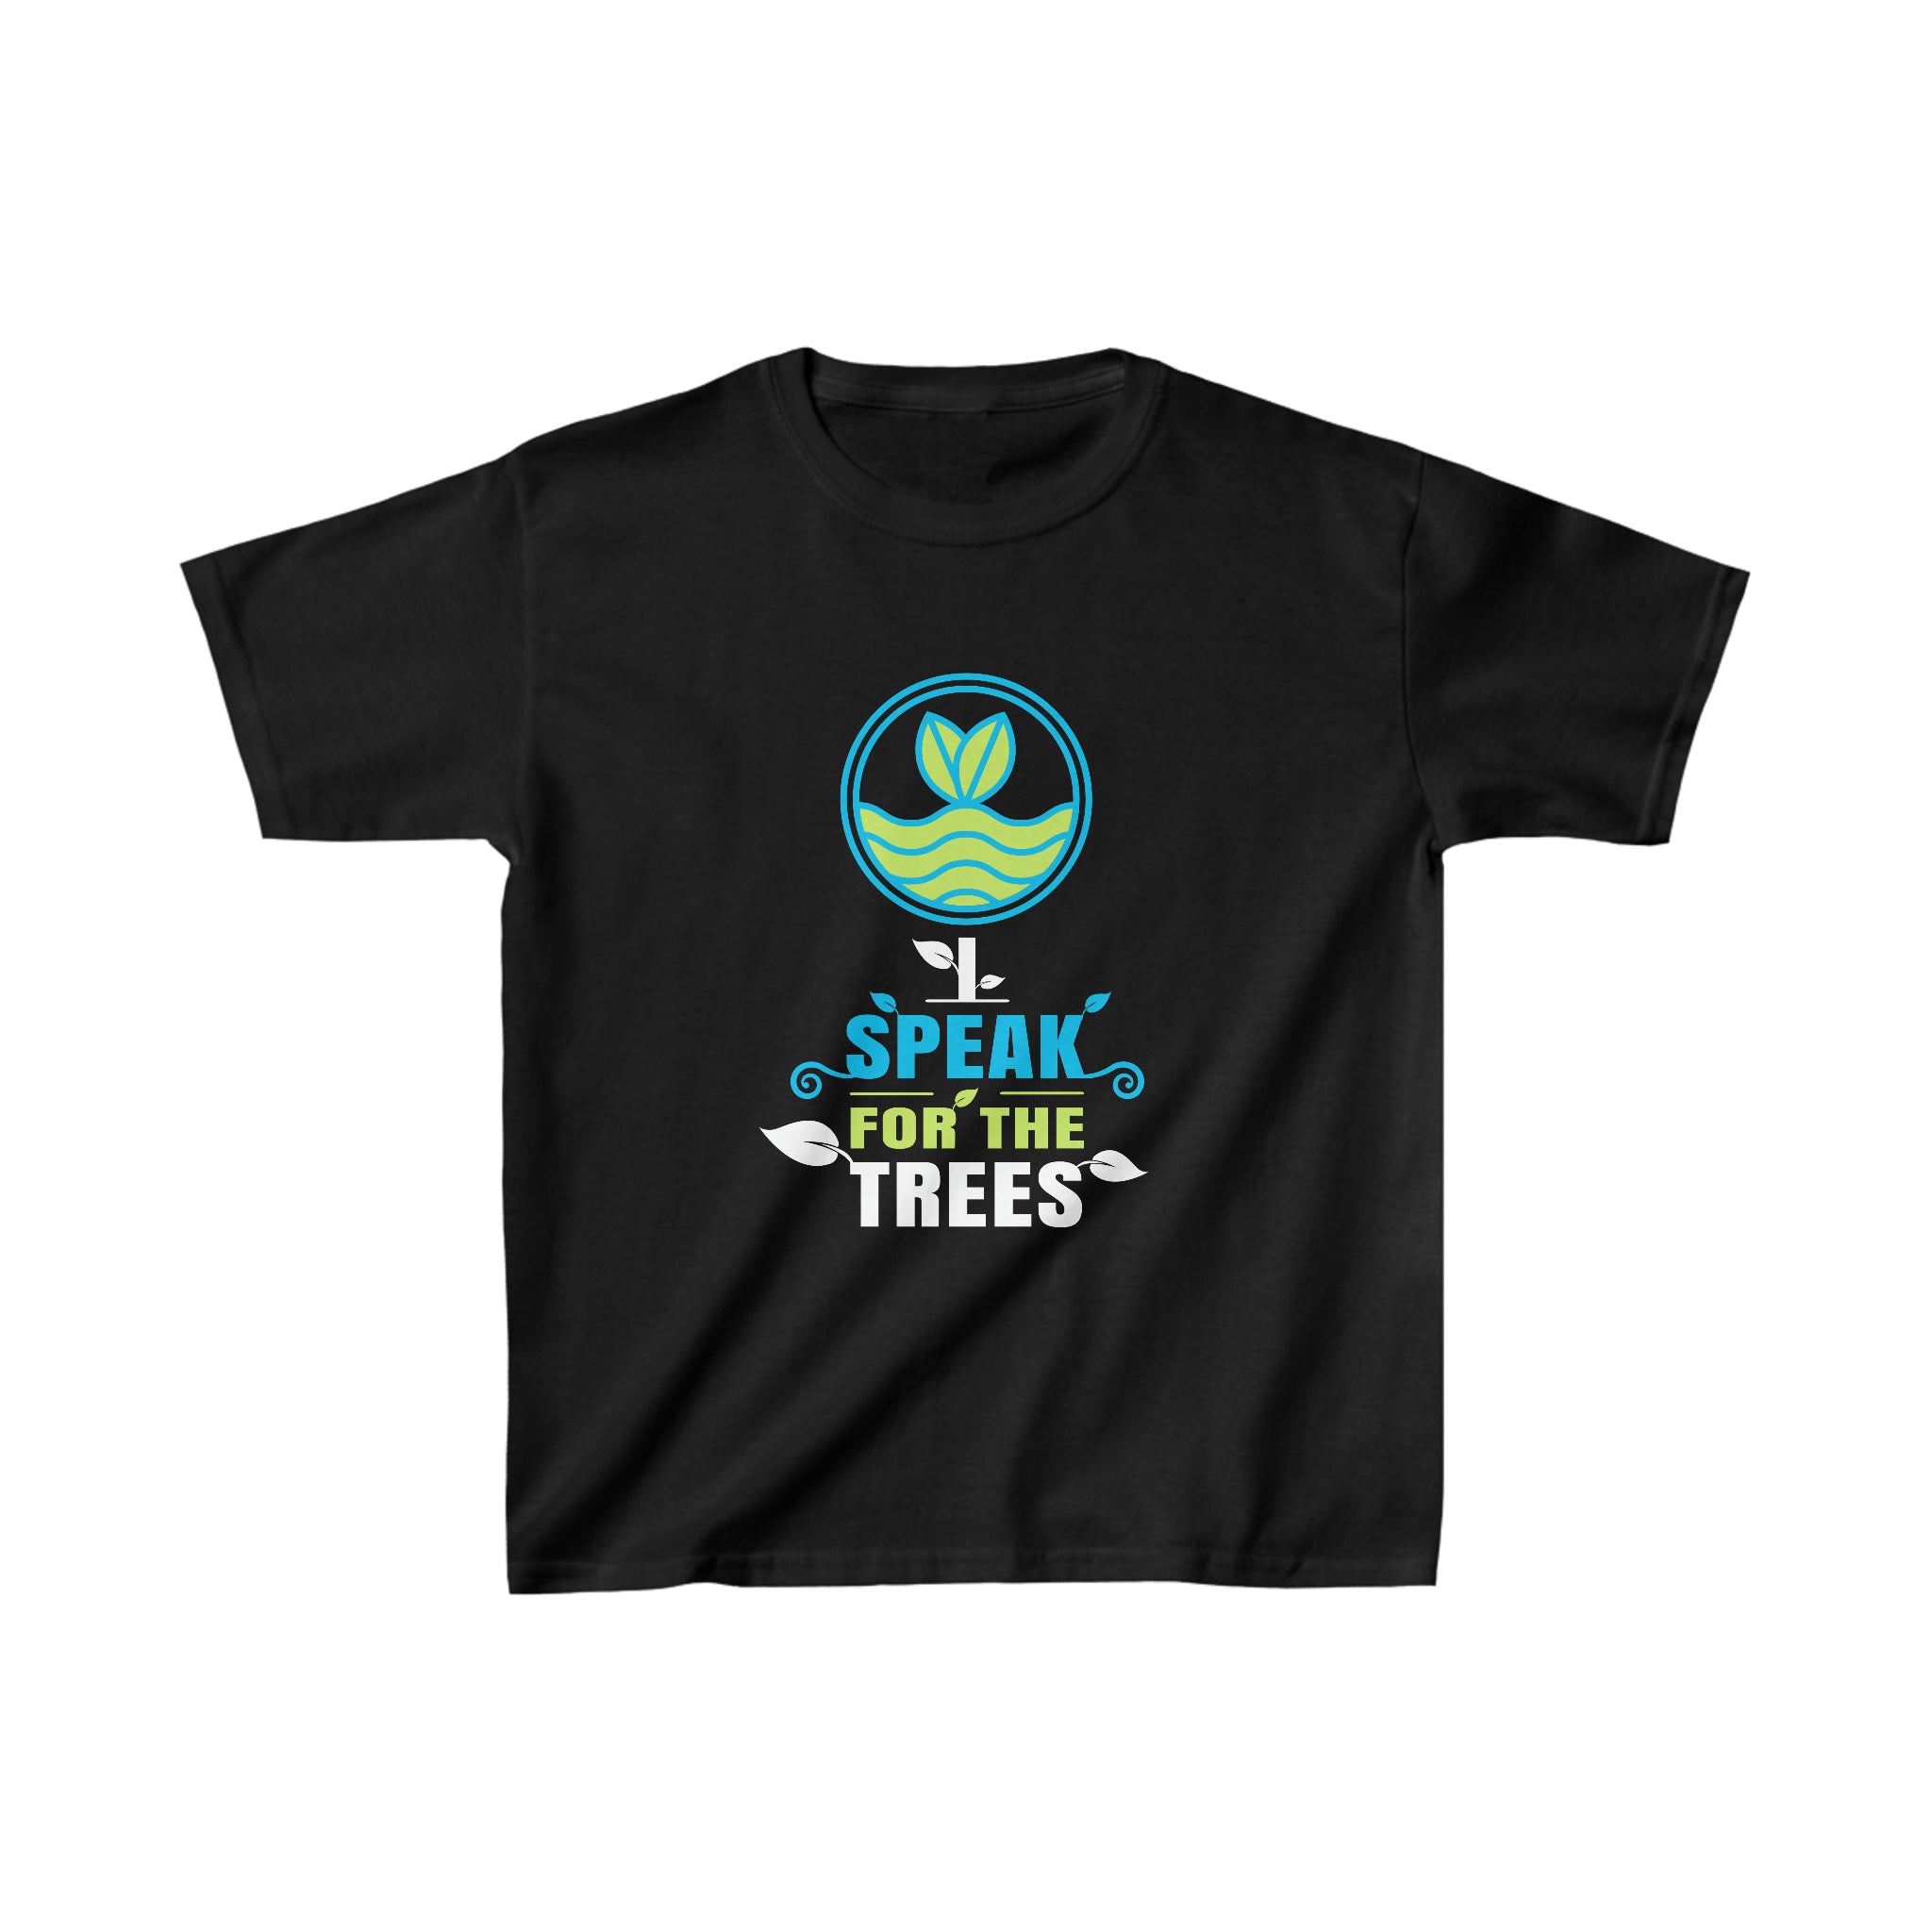 Nature Shirt I Speak For The Trees Save the Planet Girls Shirts